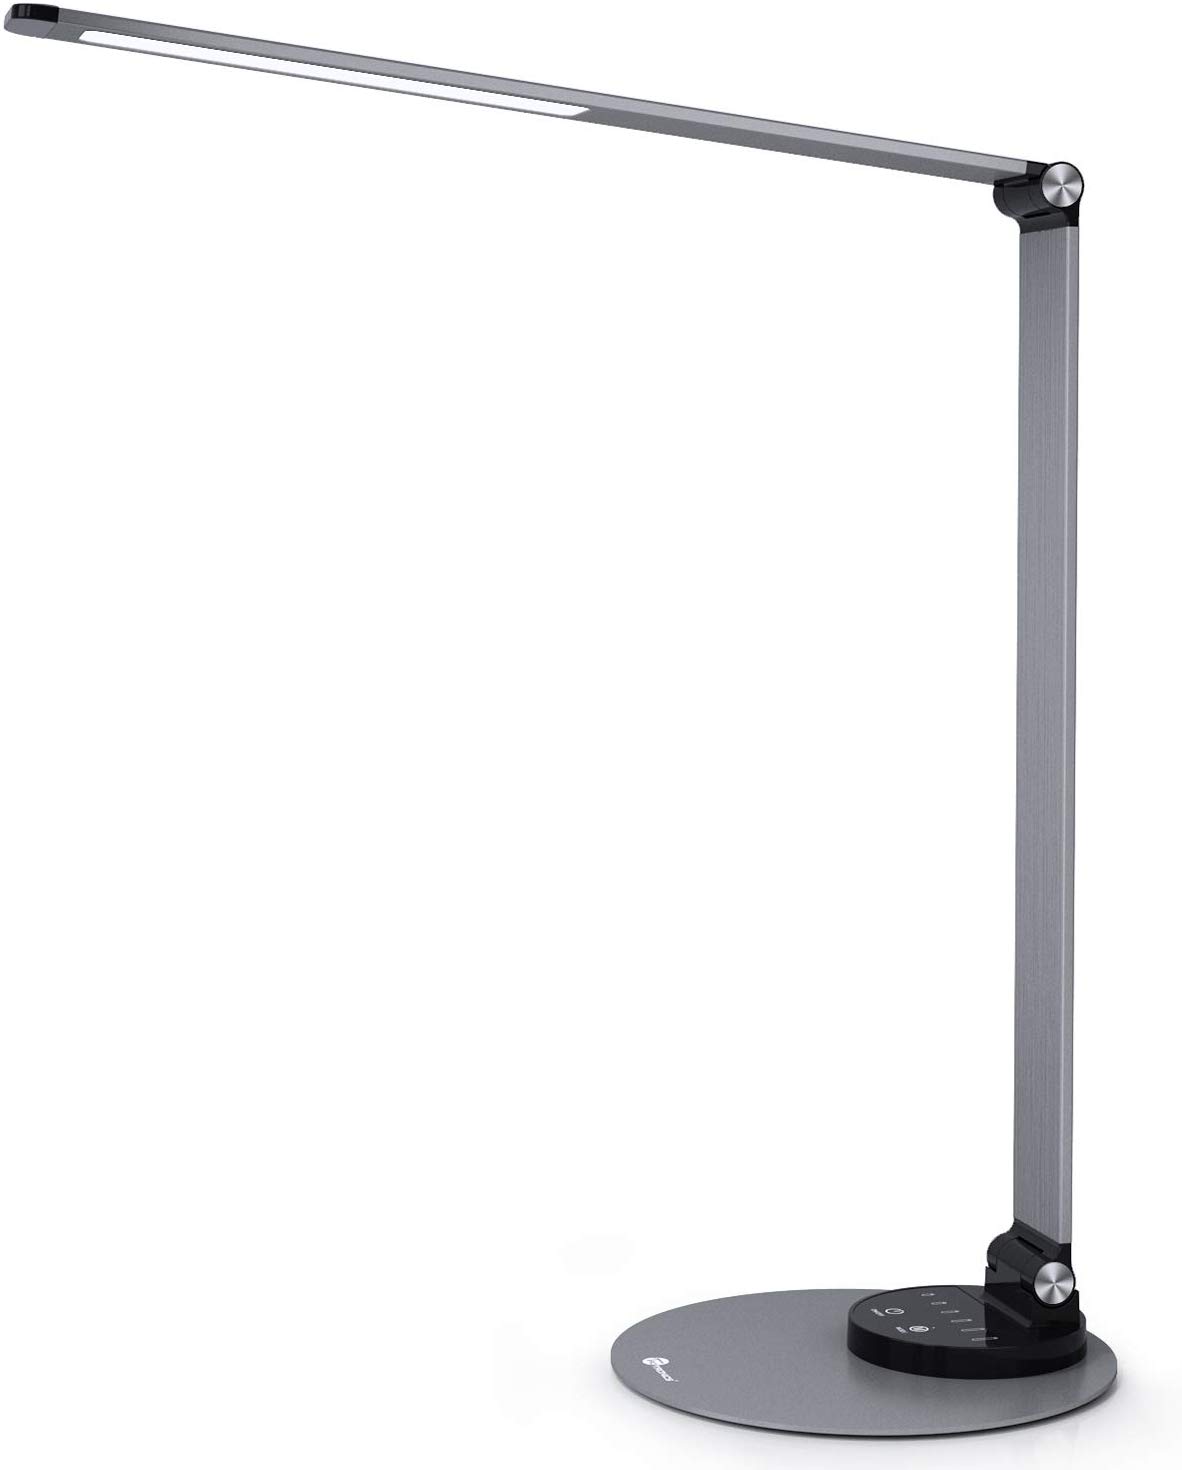 TaoTronics Dimmable LED Desk Lamp with USB Port